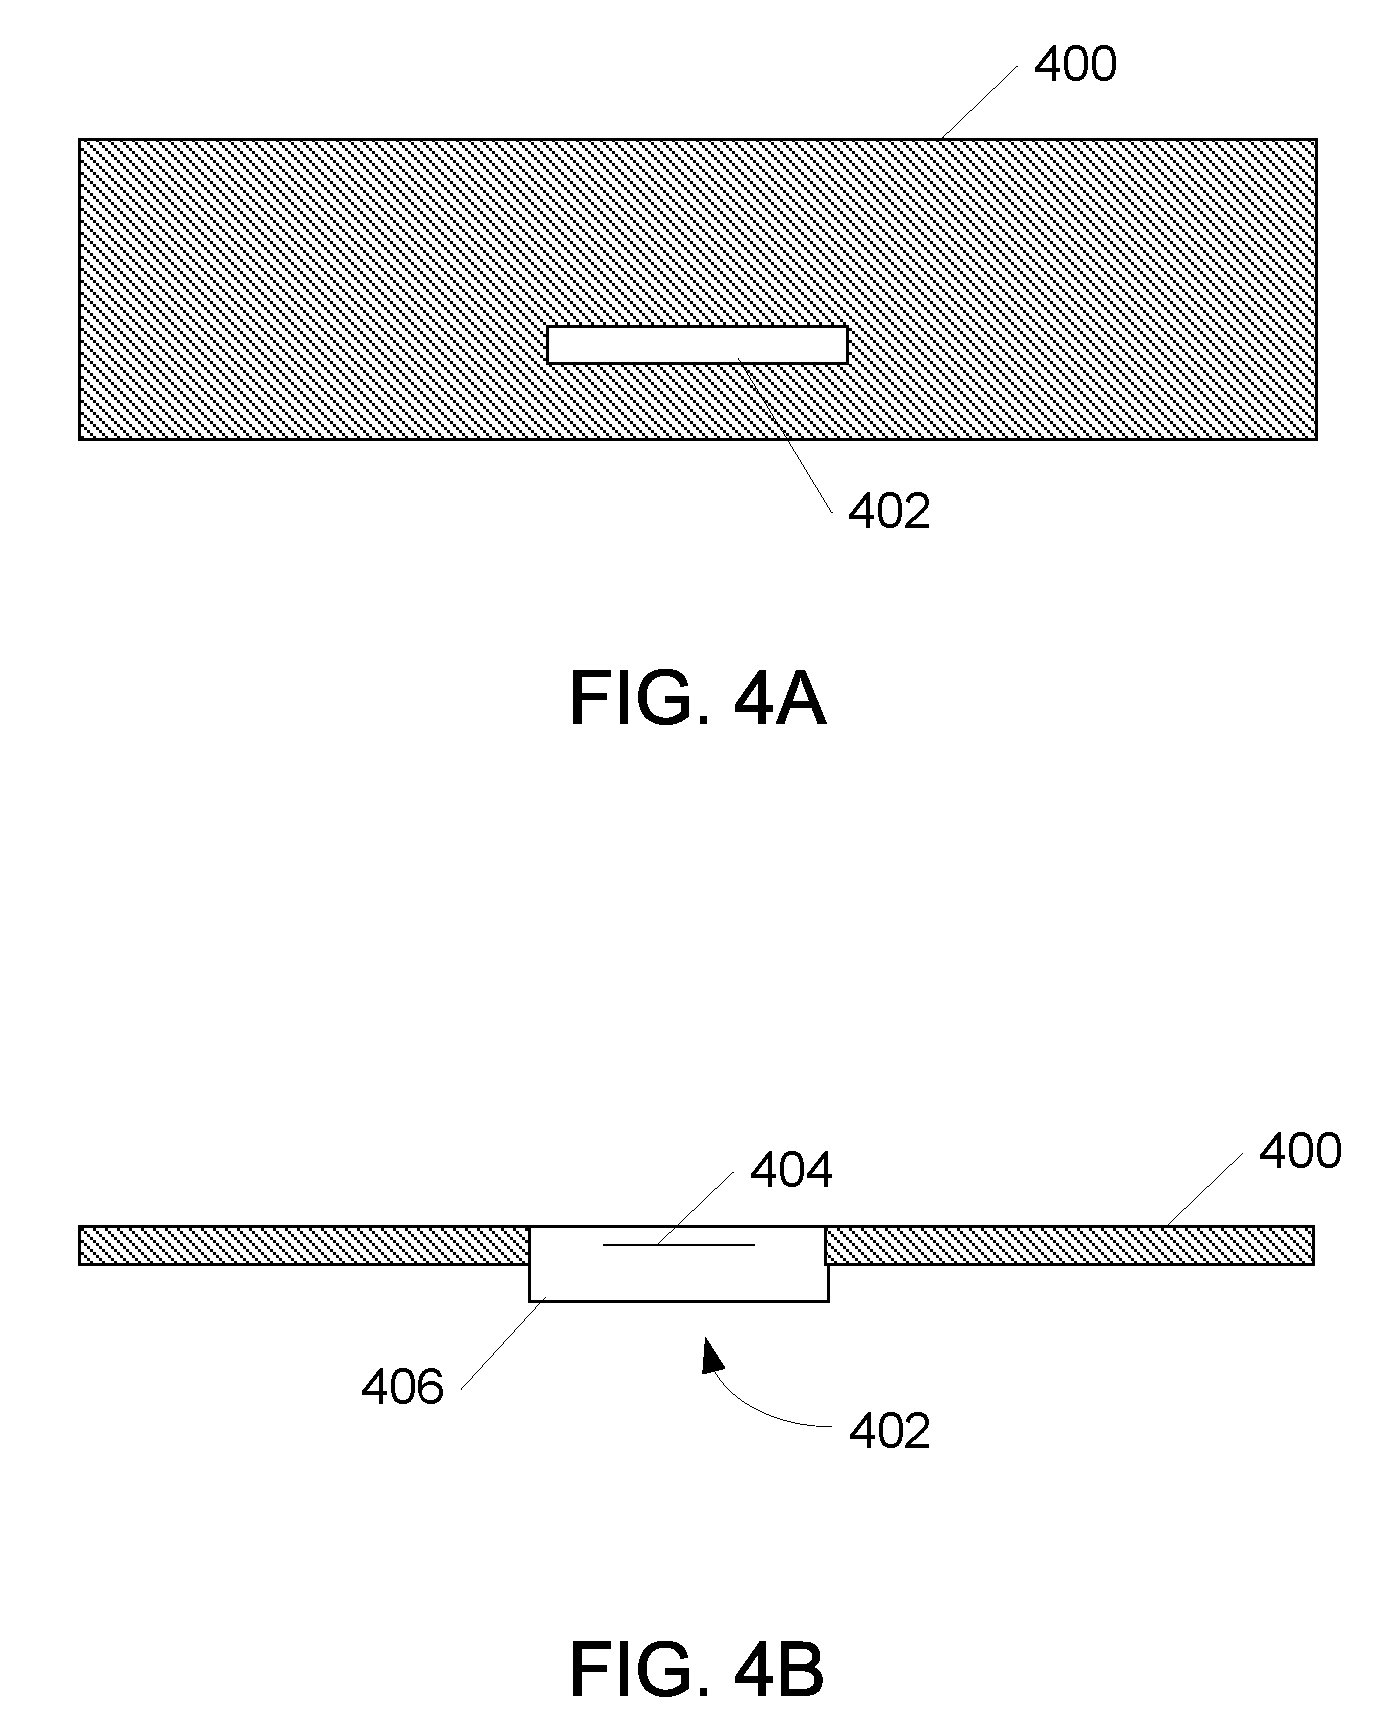 Systems and methods for a RFID enabled metal license plate